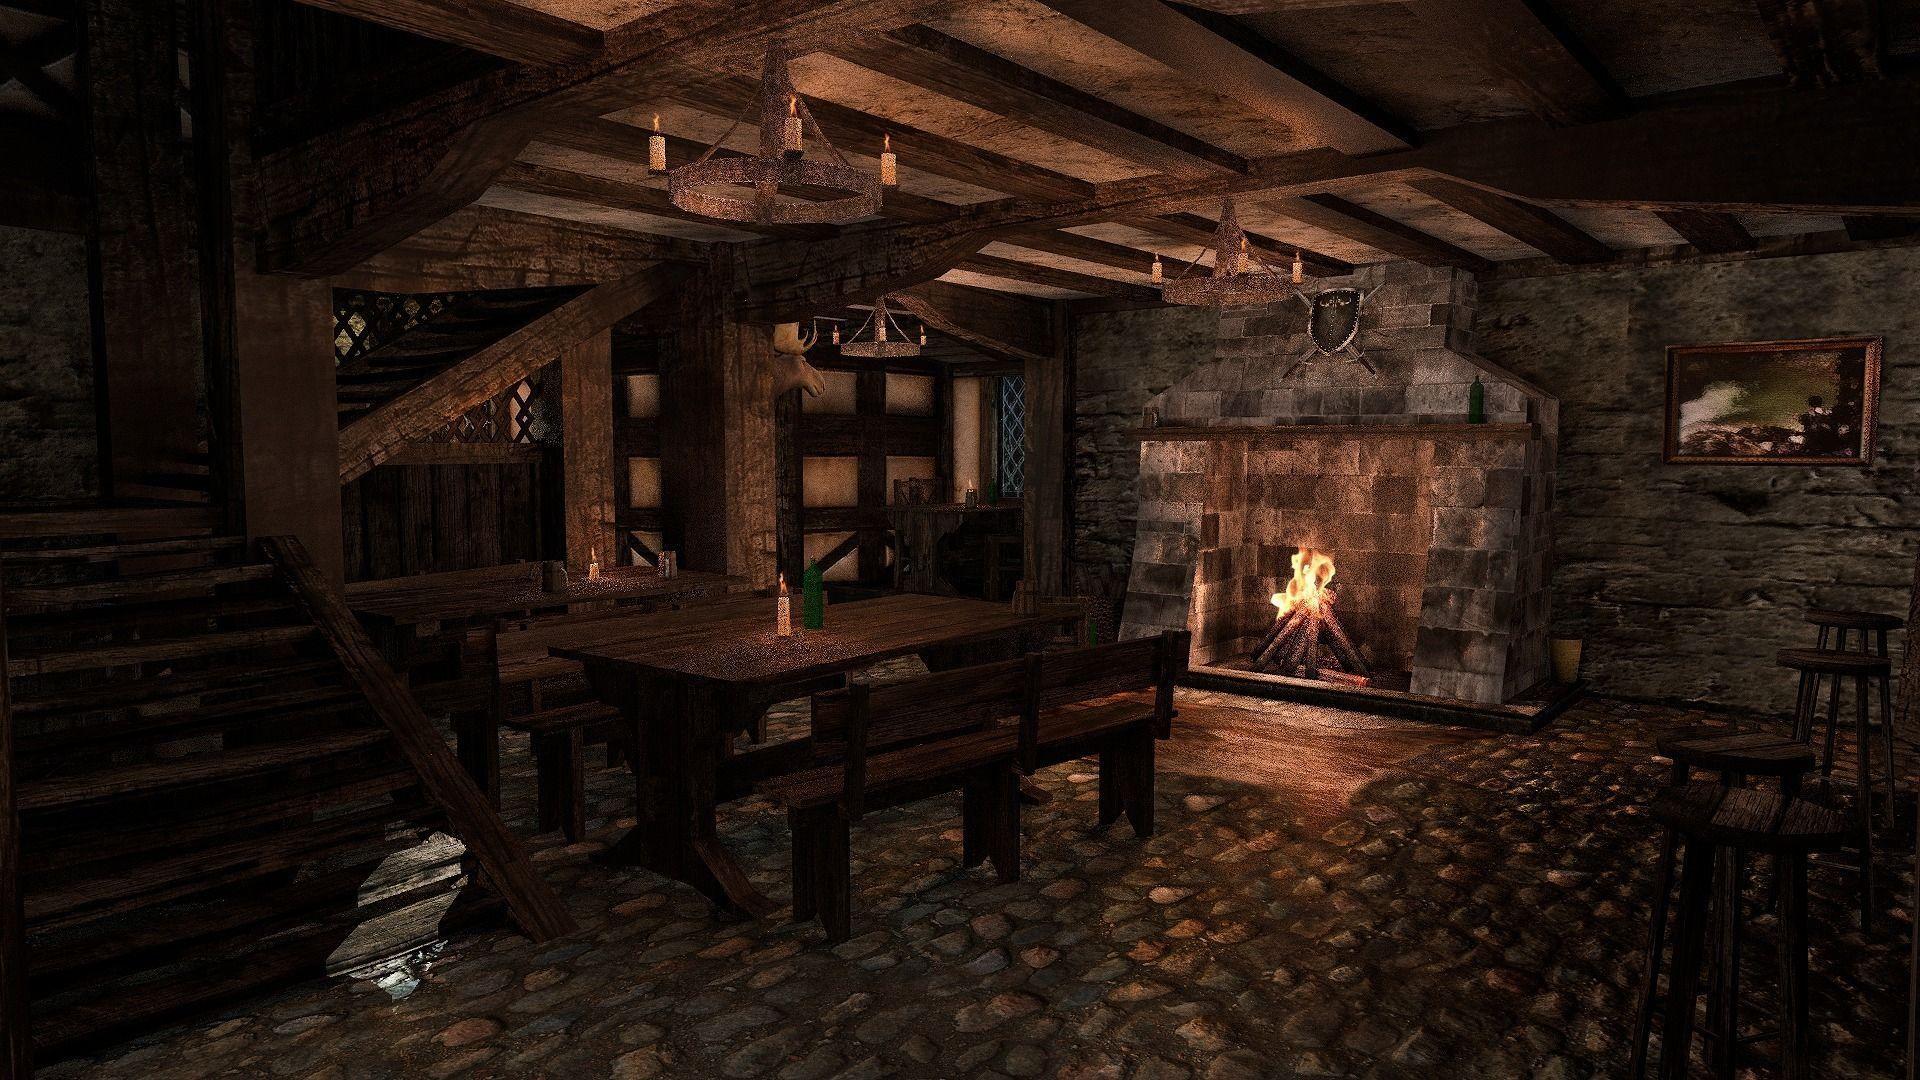 Medieval Tavern Wallpapers - Top Free Medieval Tavern Backgrounds